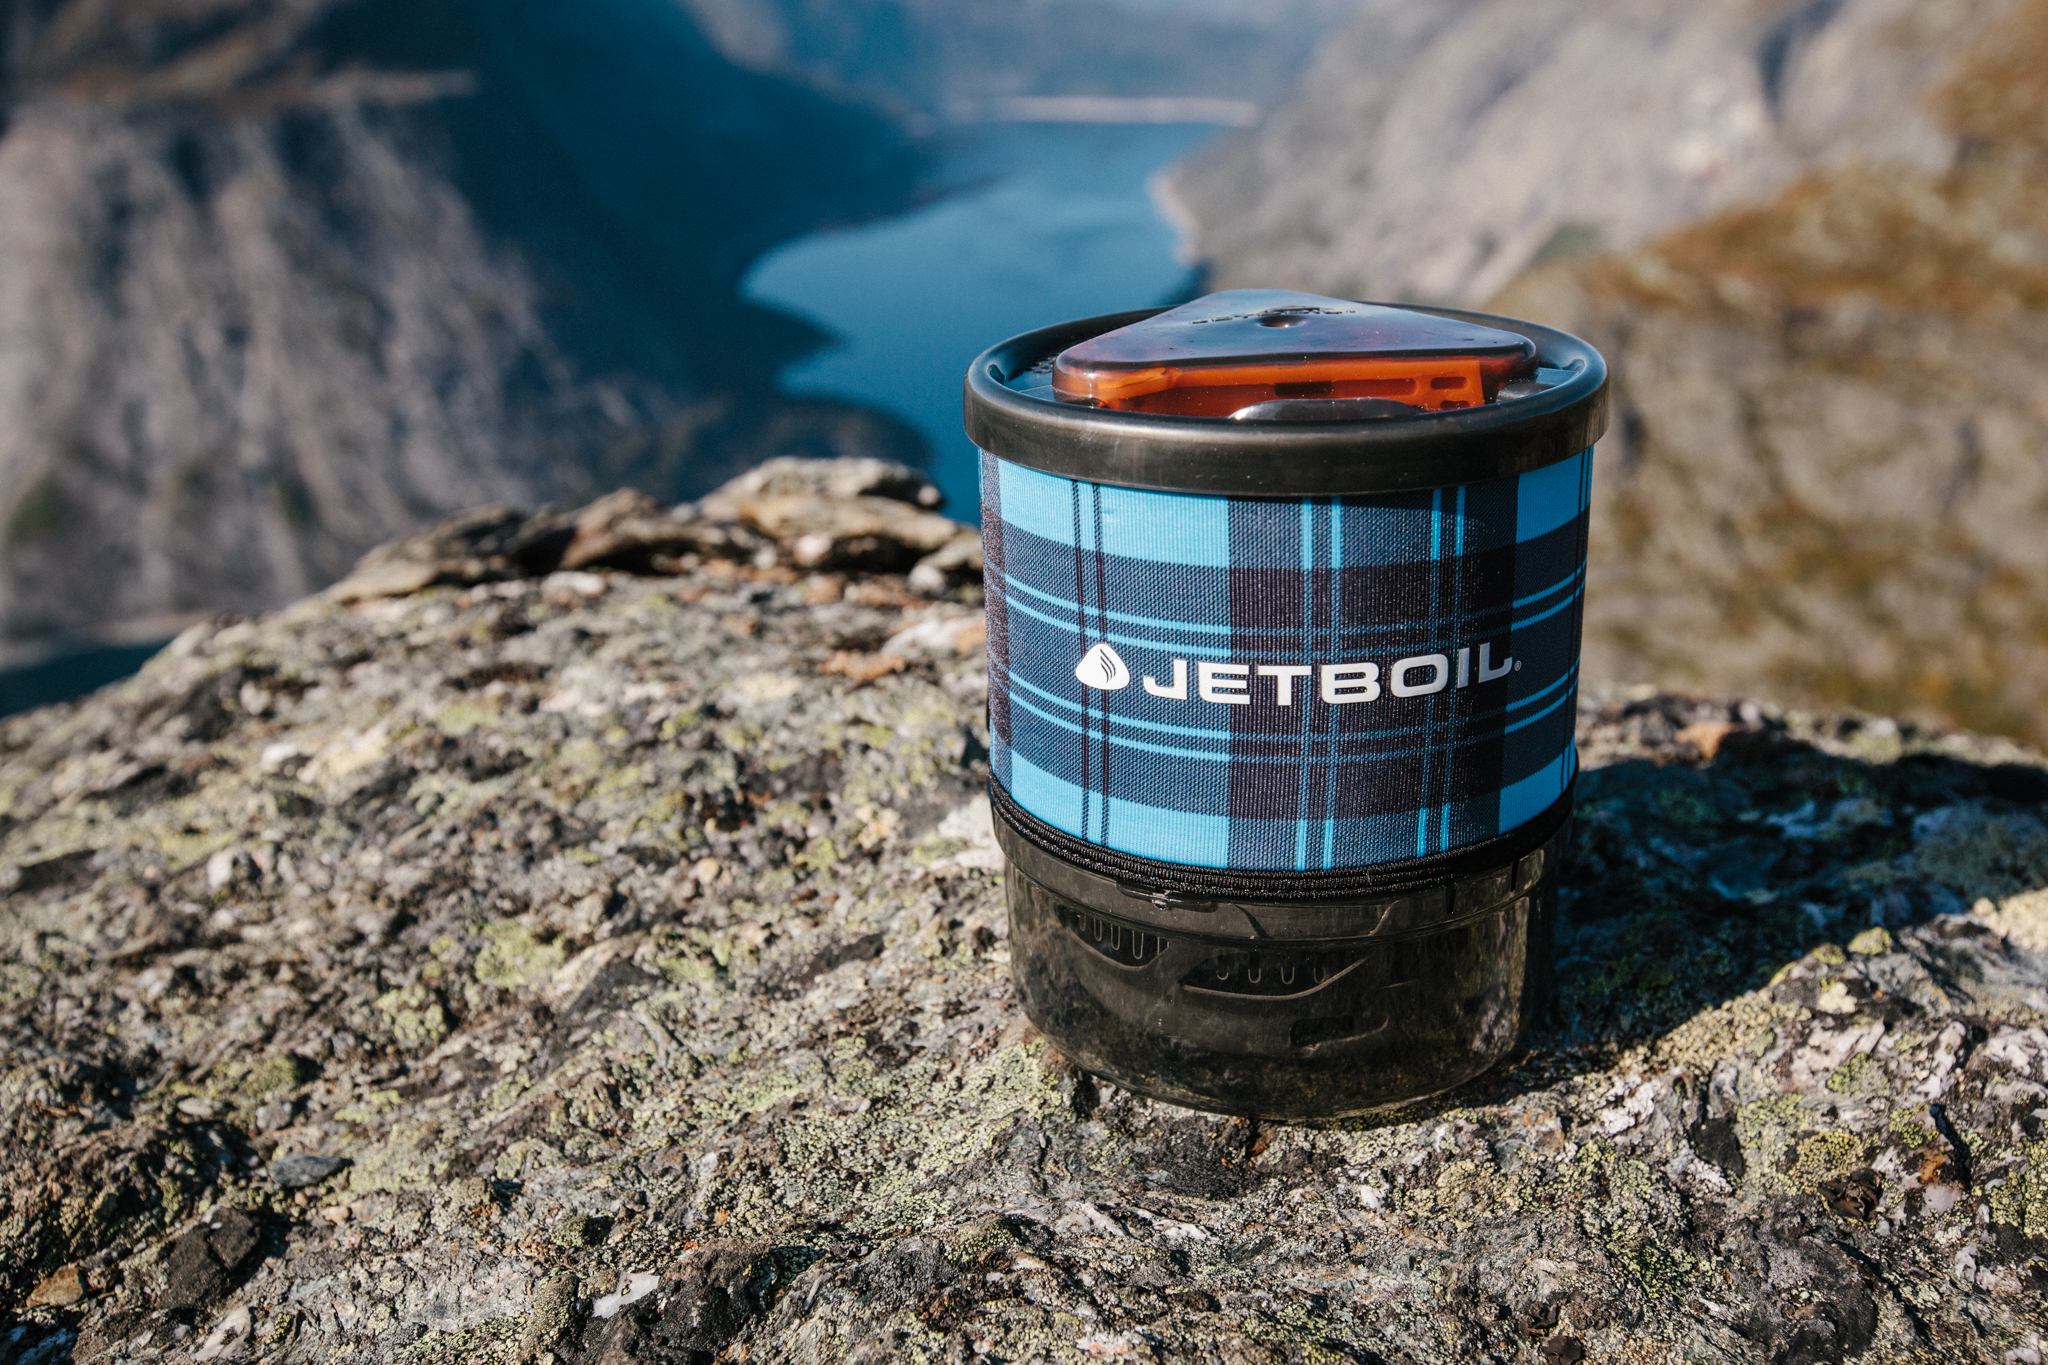 Adventure Tested: Jetboil MiniMo Backpacking Stove